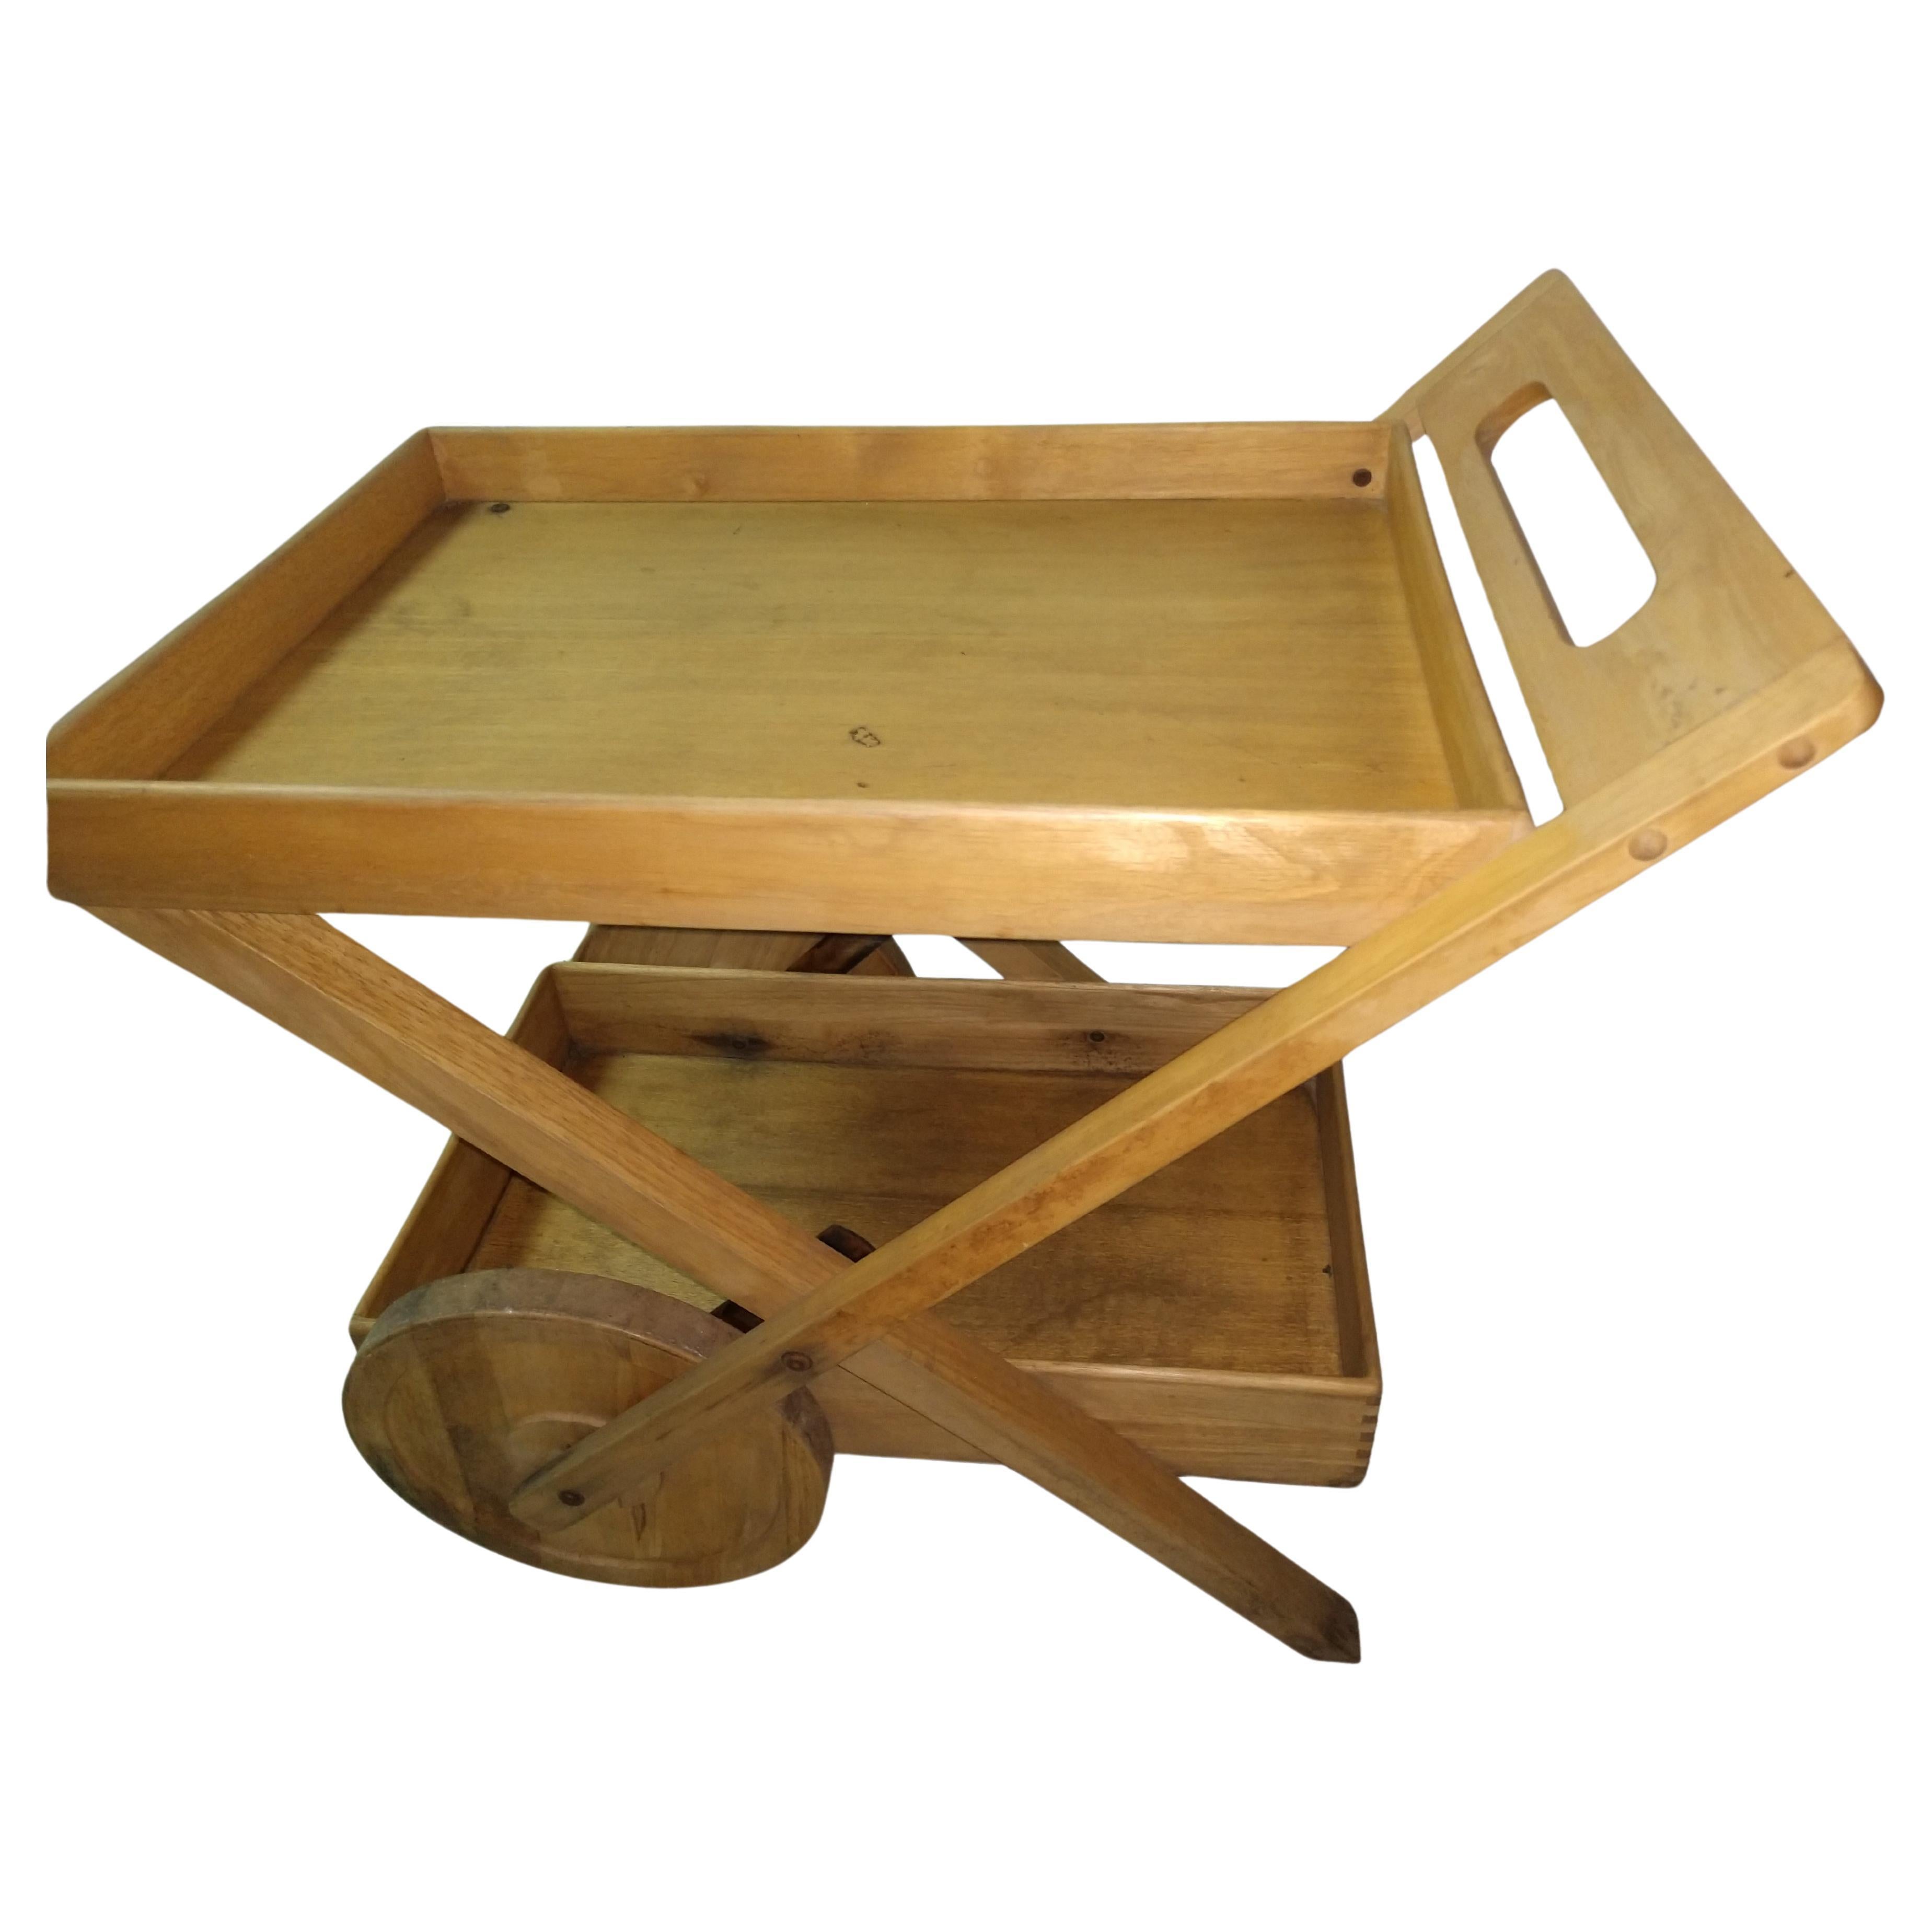 Totally fabulous teak bar cart by Jens Quistgaard for Dansk. Fixed trays are 19.5 x 27.5 and 15.5 x 28.
Teak so it can withstand the elements outdoors. Large wheels roll effortlessly. This seems to be a rare piece as I have not found another. In